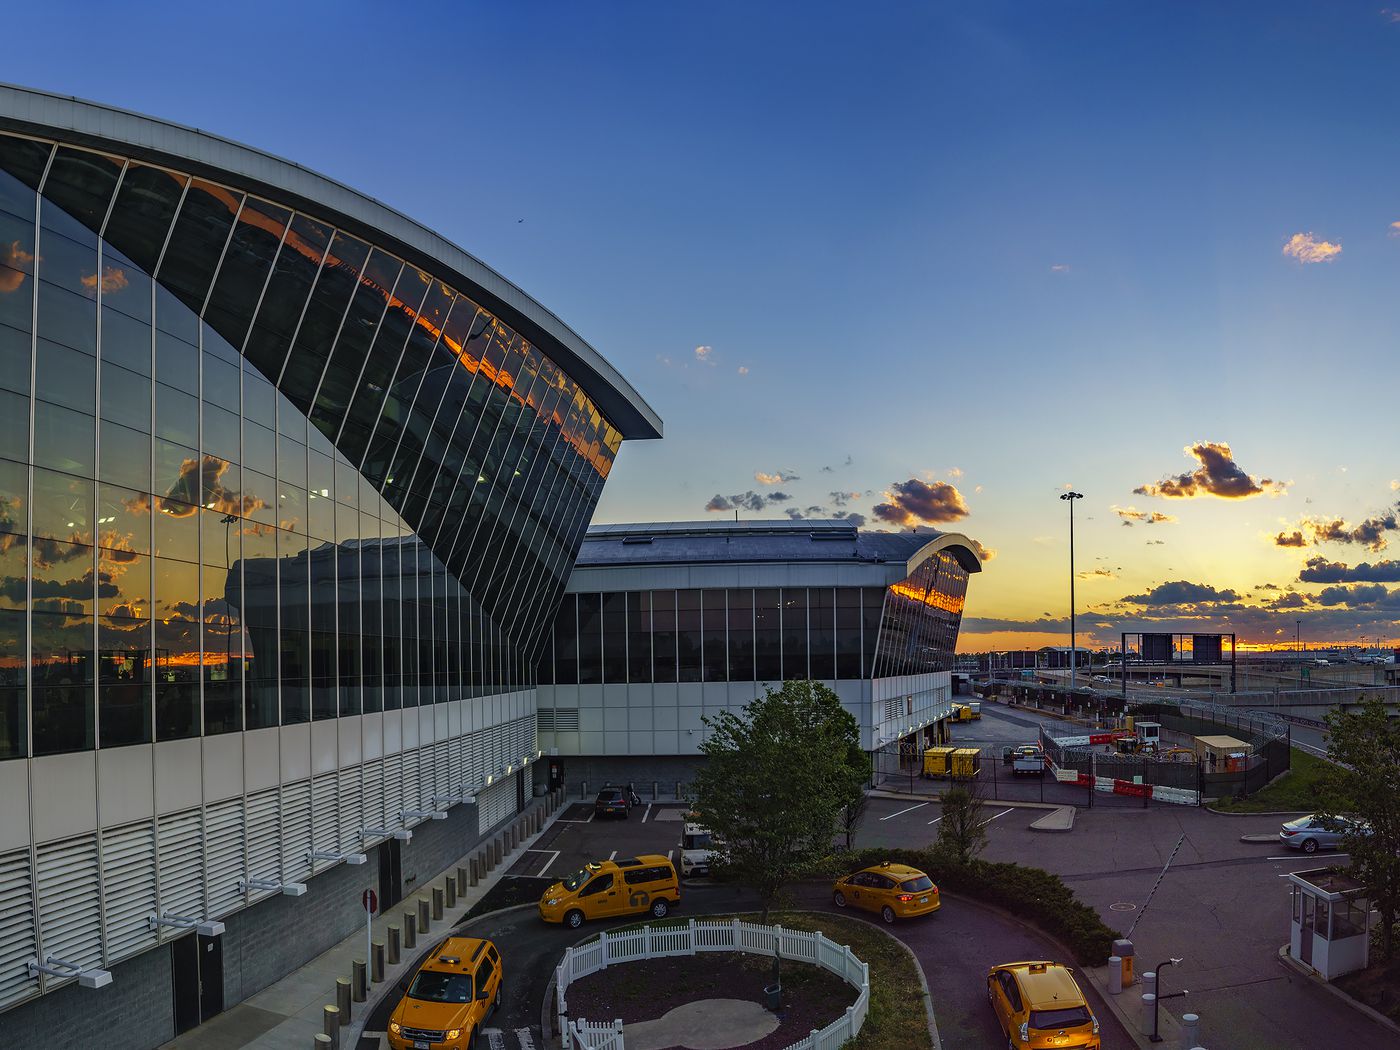 JFK Lounges: Relax in Style at John F. Kennedy Airport